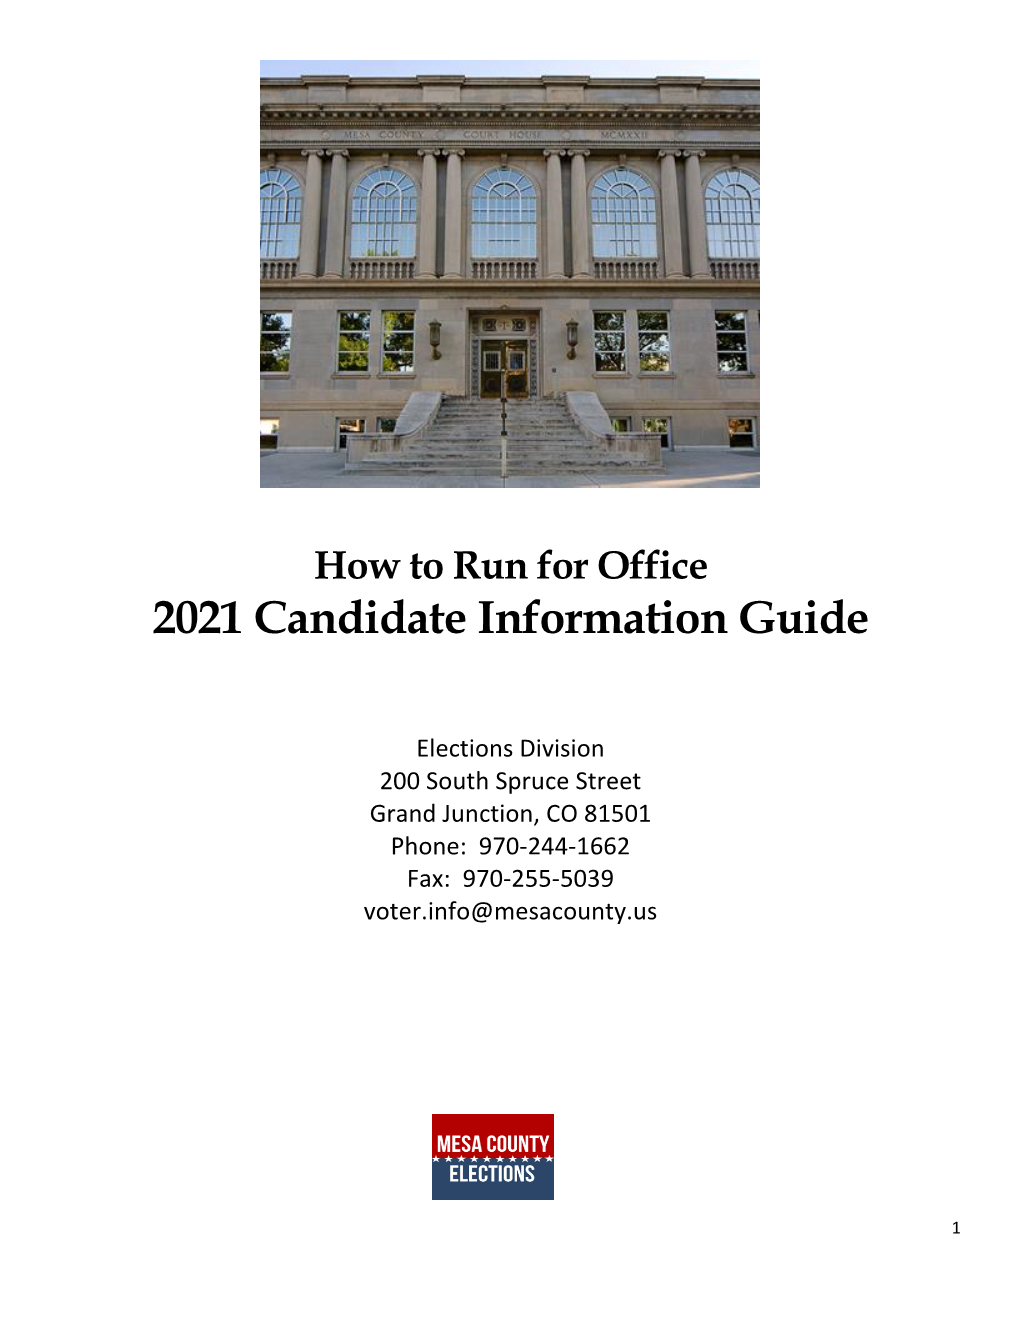 2021 Candidate Information Guide